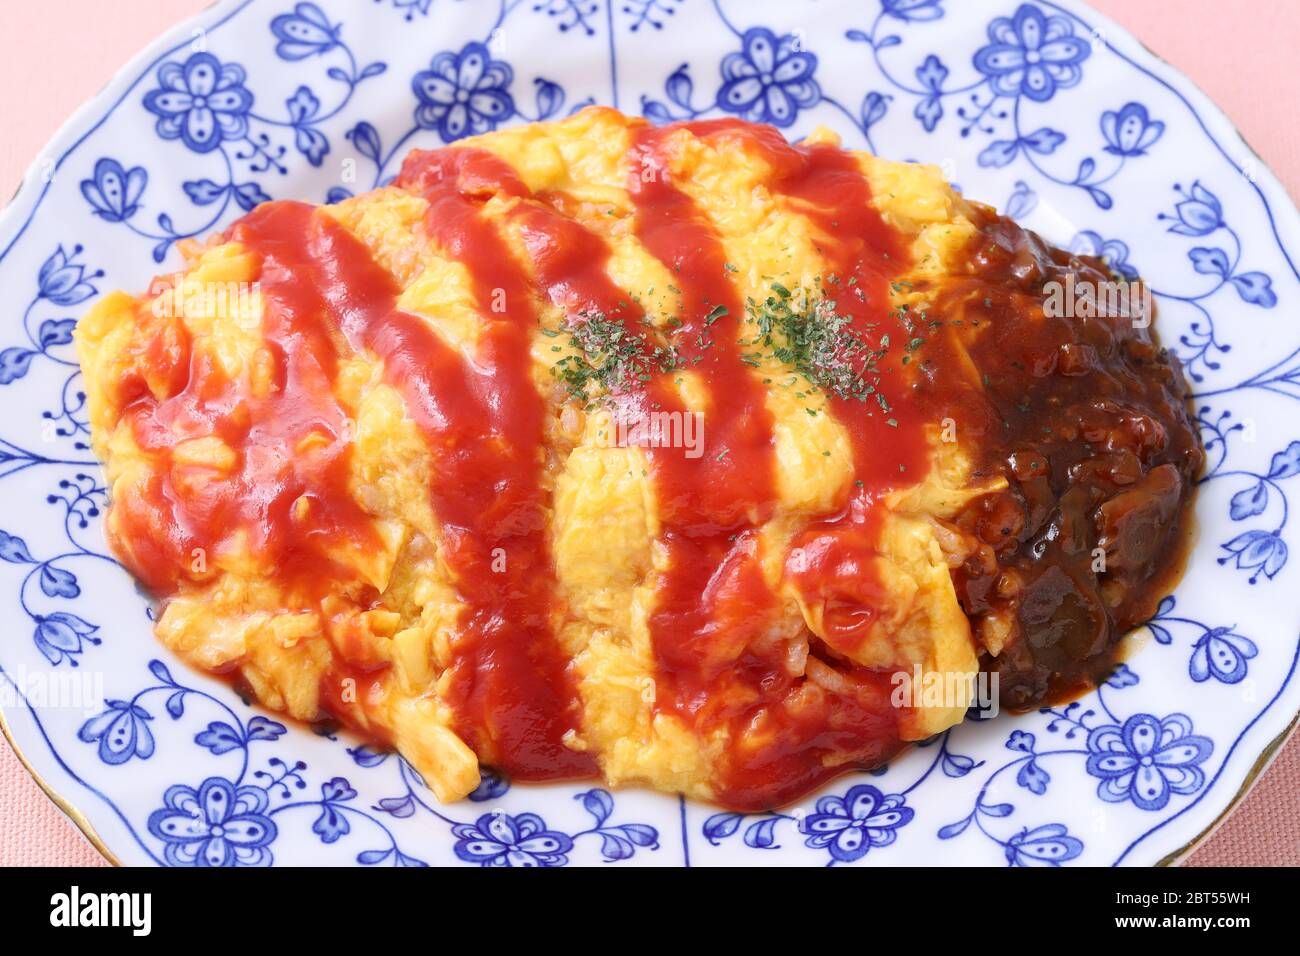 Japanese food, Omuraise with ketchup in a plate on table Stock Photo